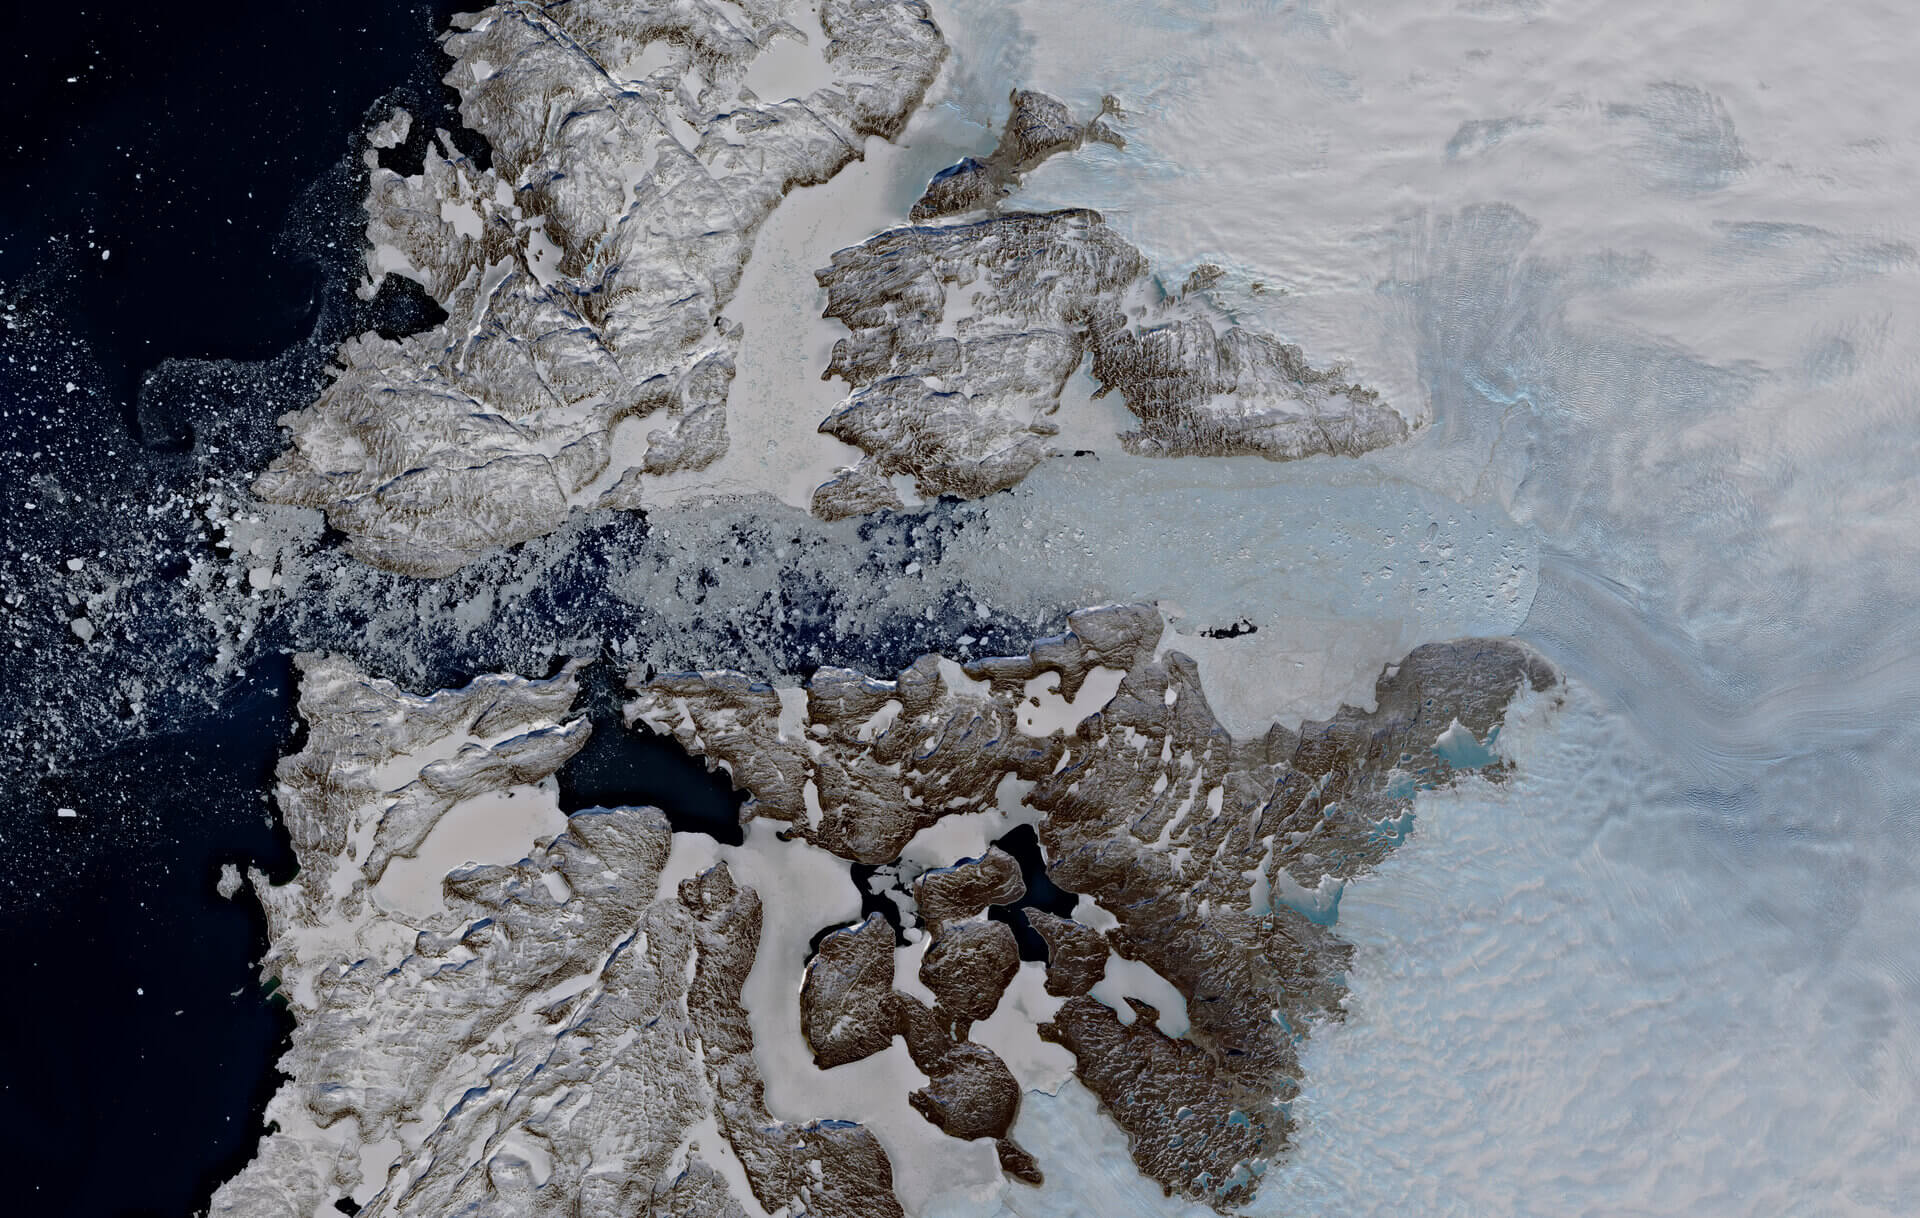 Satellite view of the Ilulissat glacier and icefjord